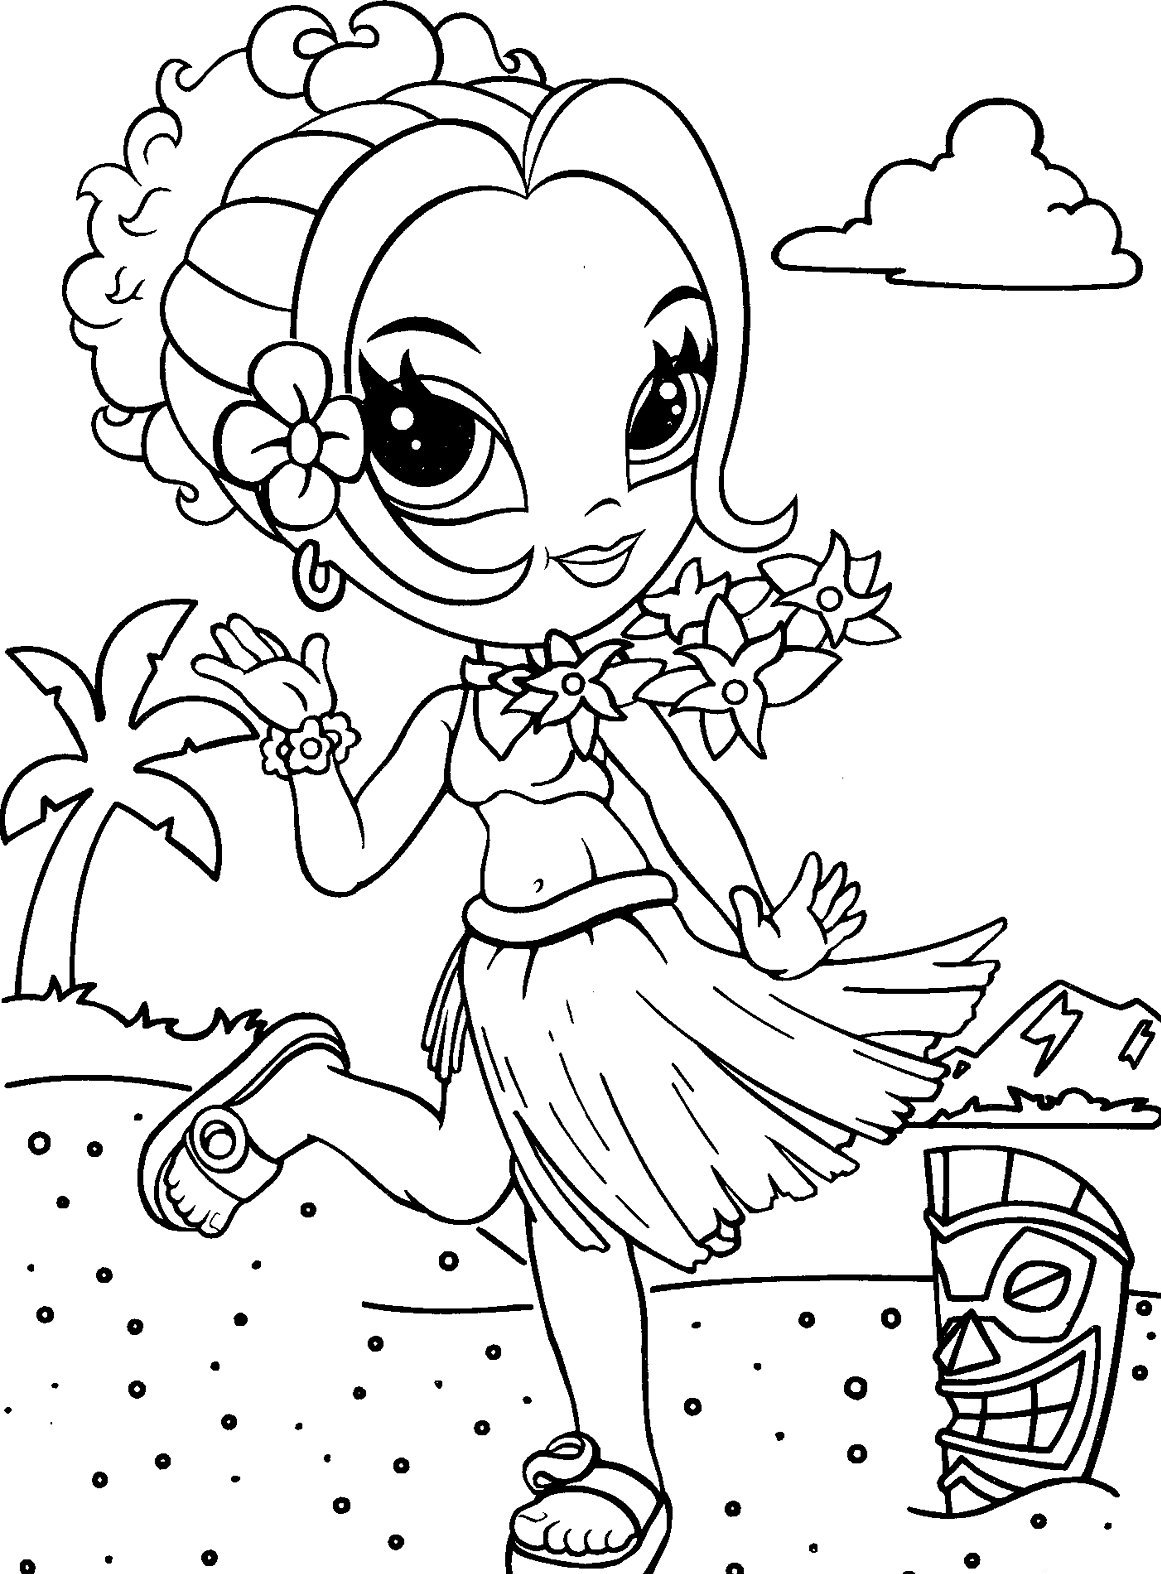 a frank coloring pages - photo #23